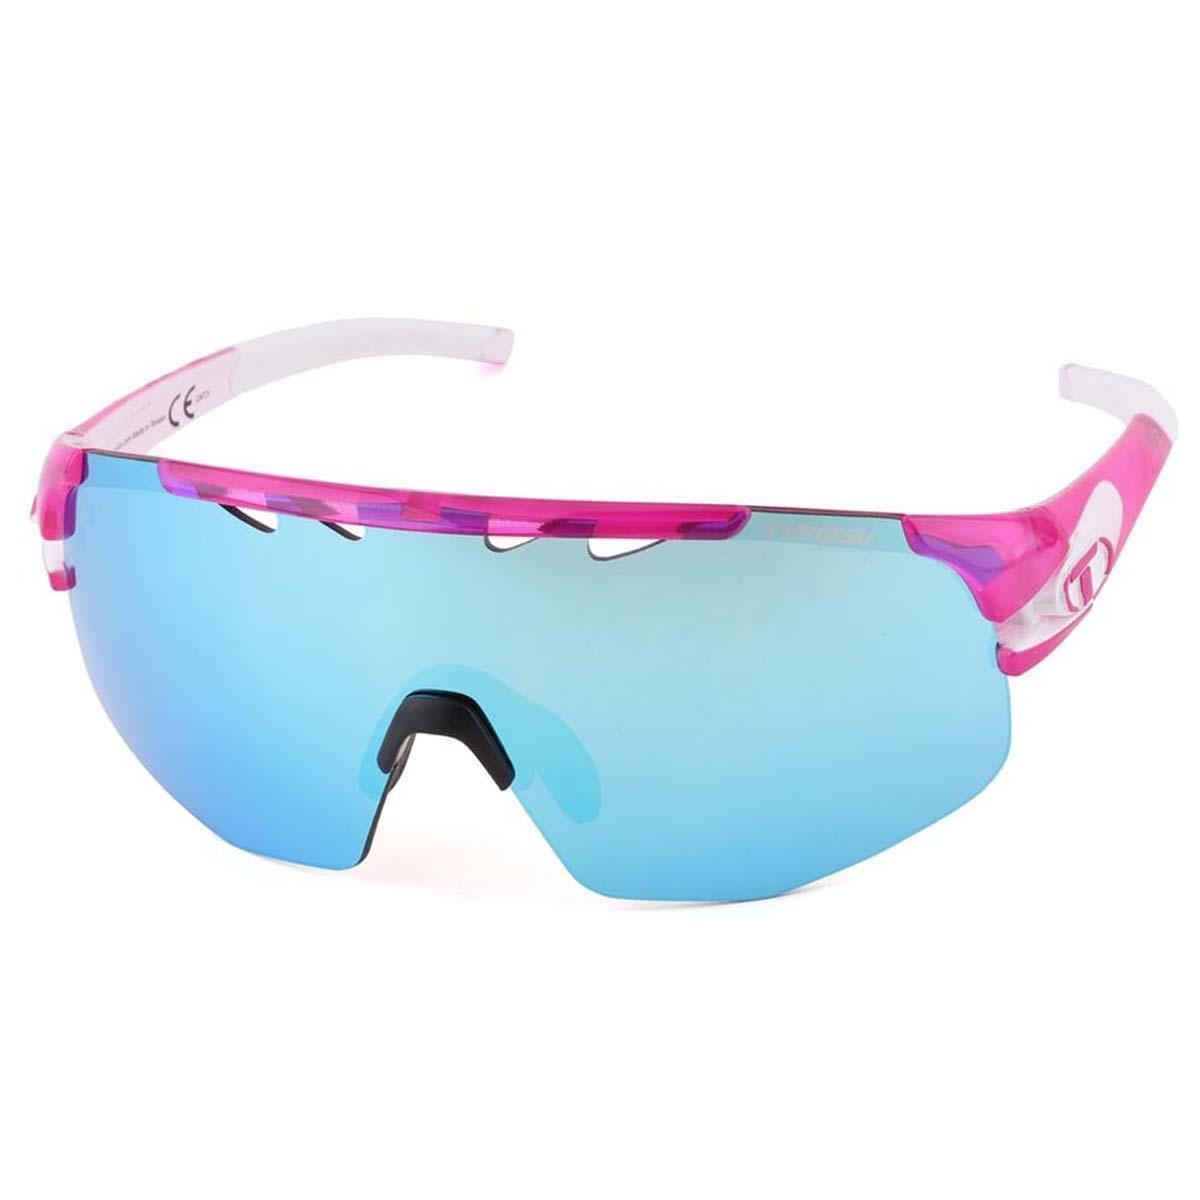 Tifosi Optics Sledge Lite Sunglasses Crystal Pink - Clarion Blue/AC Red/Clear